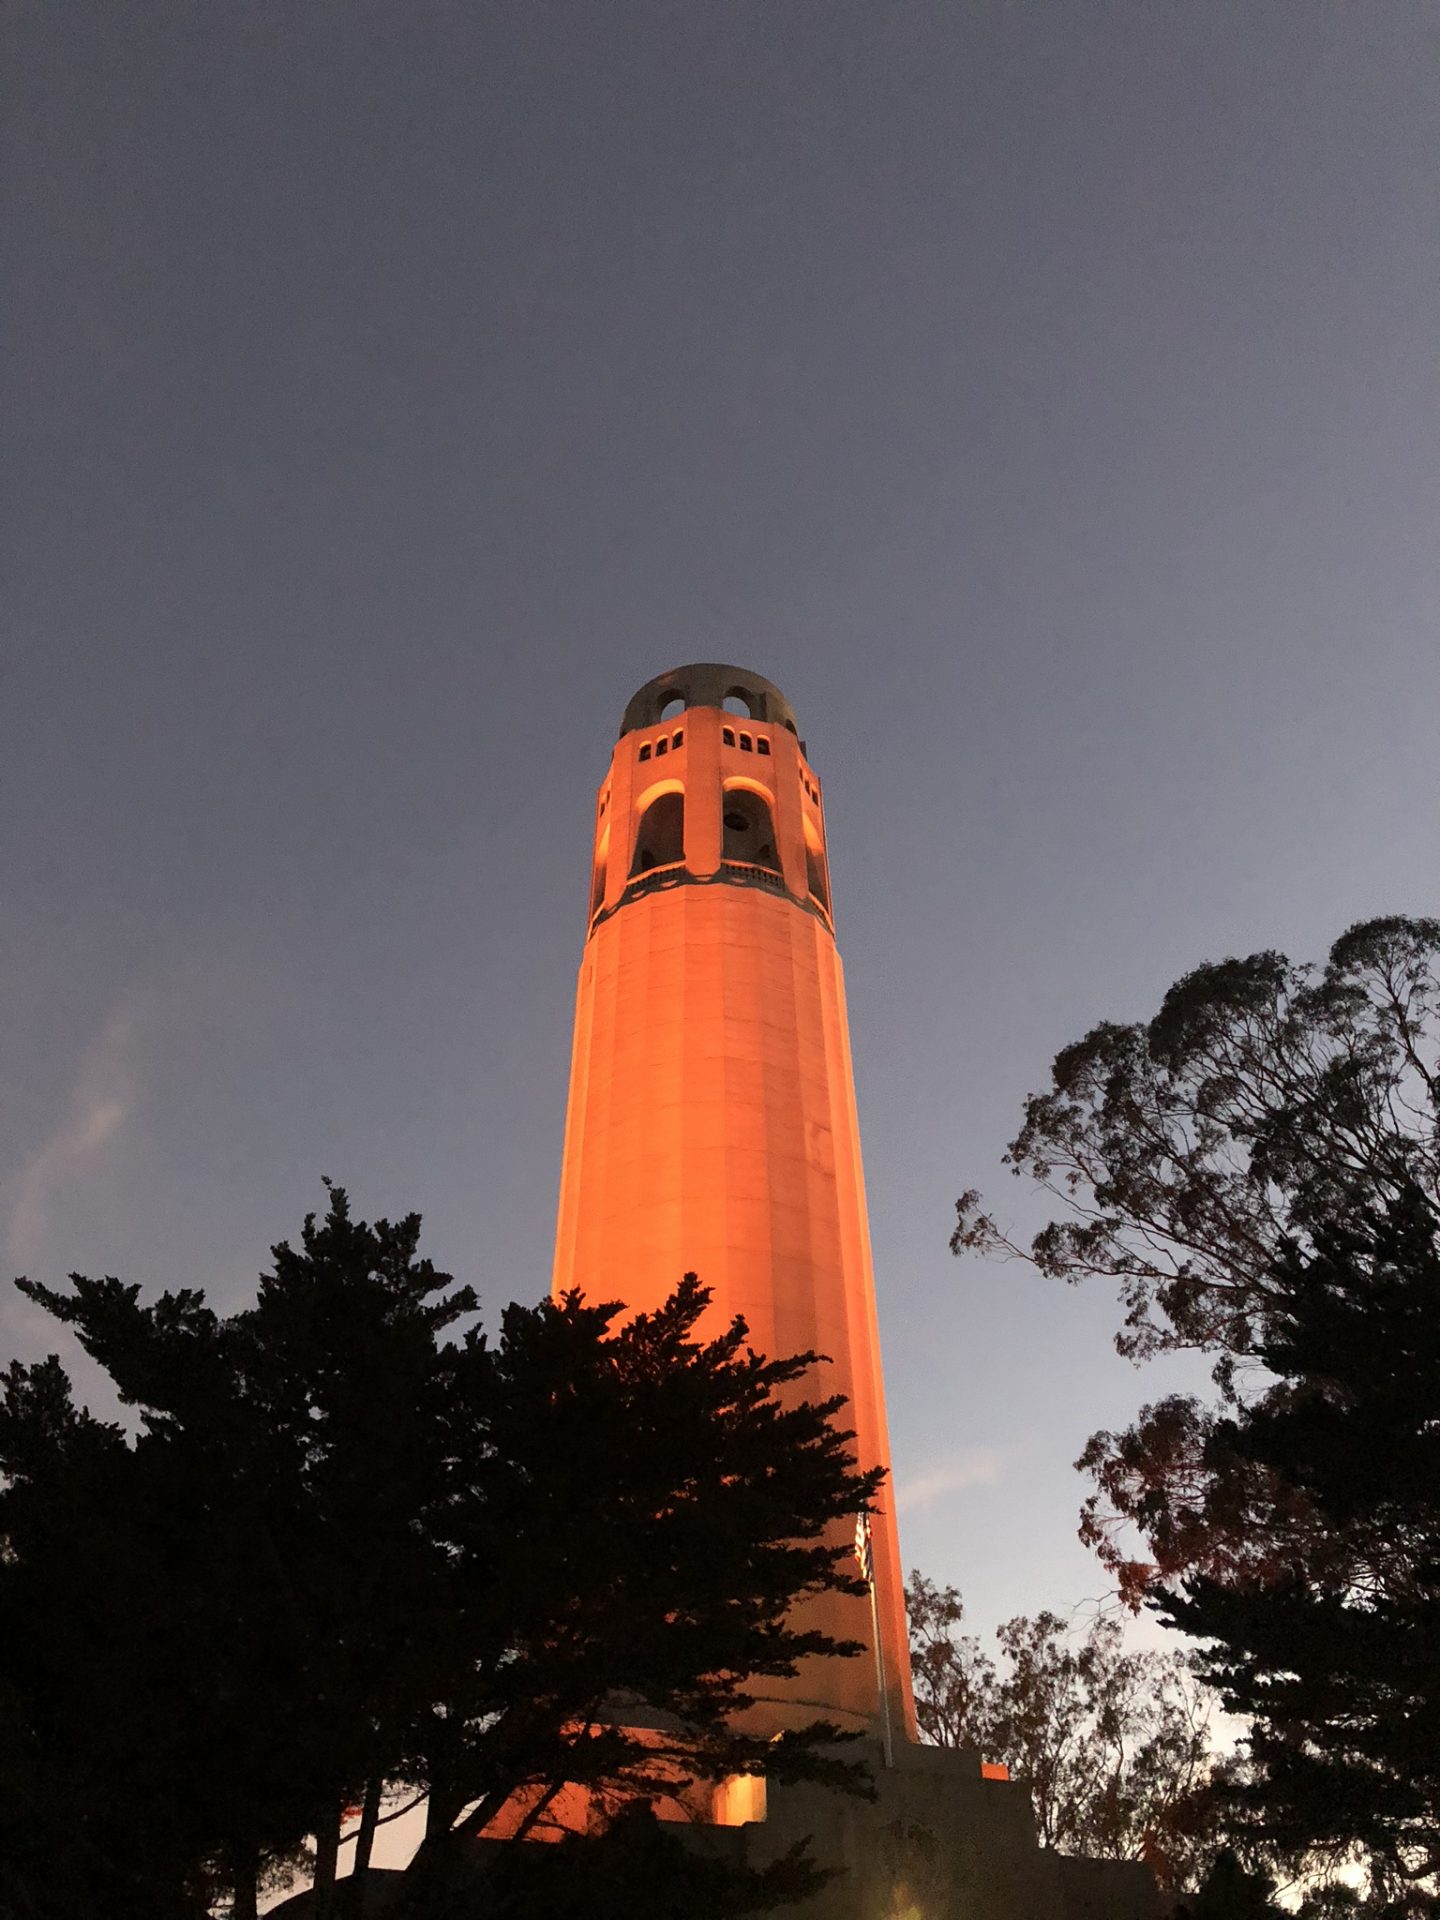 Sunset over the Coit Tower, San Francisco